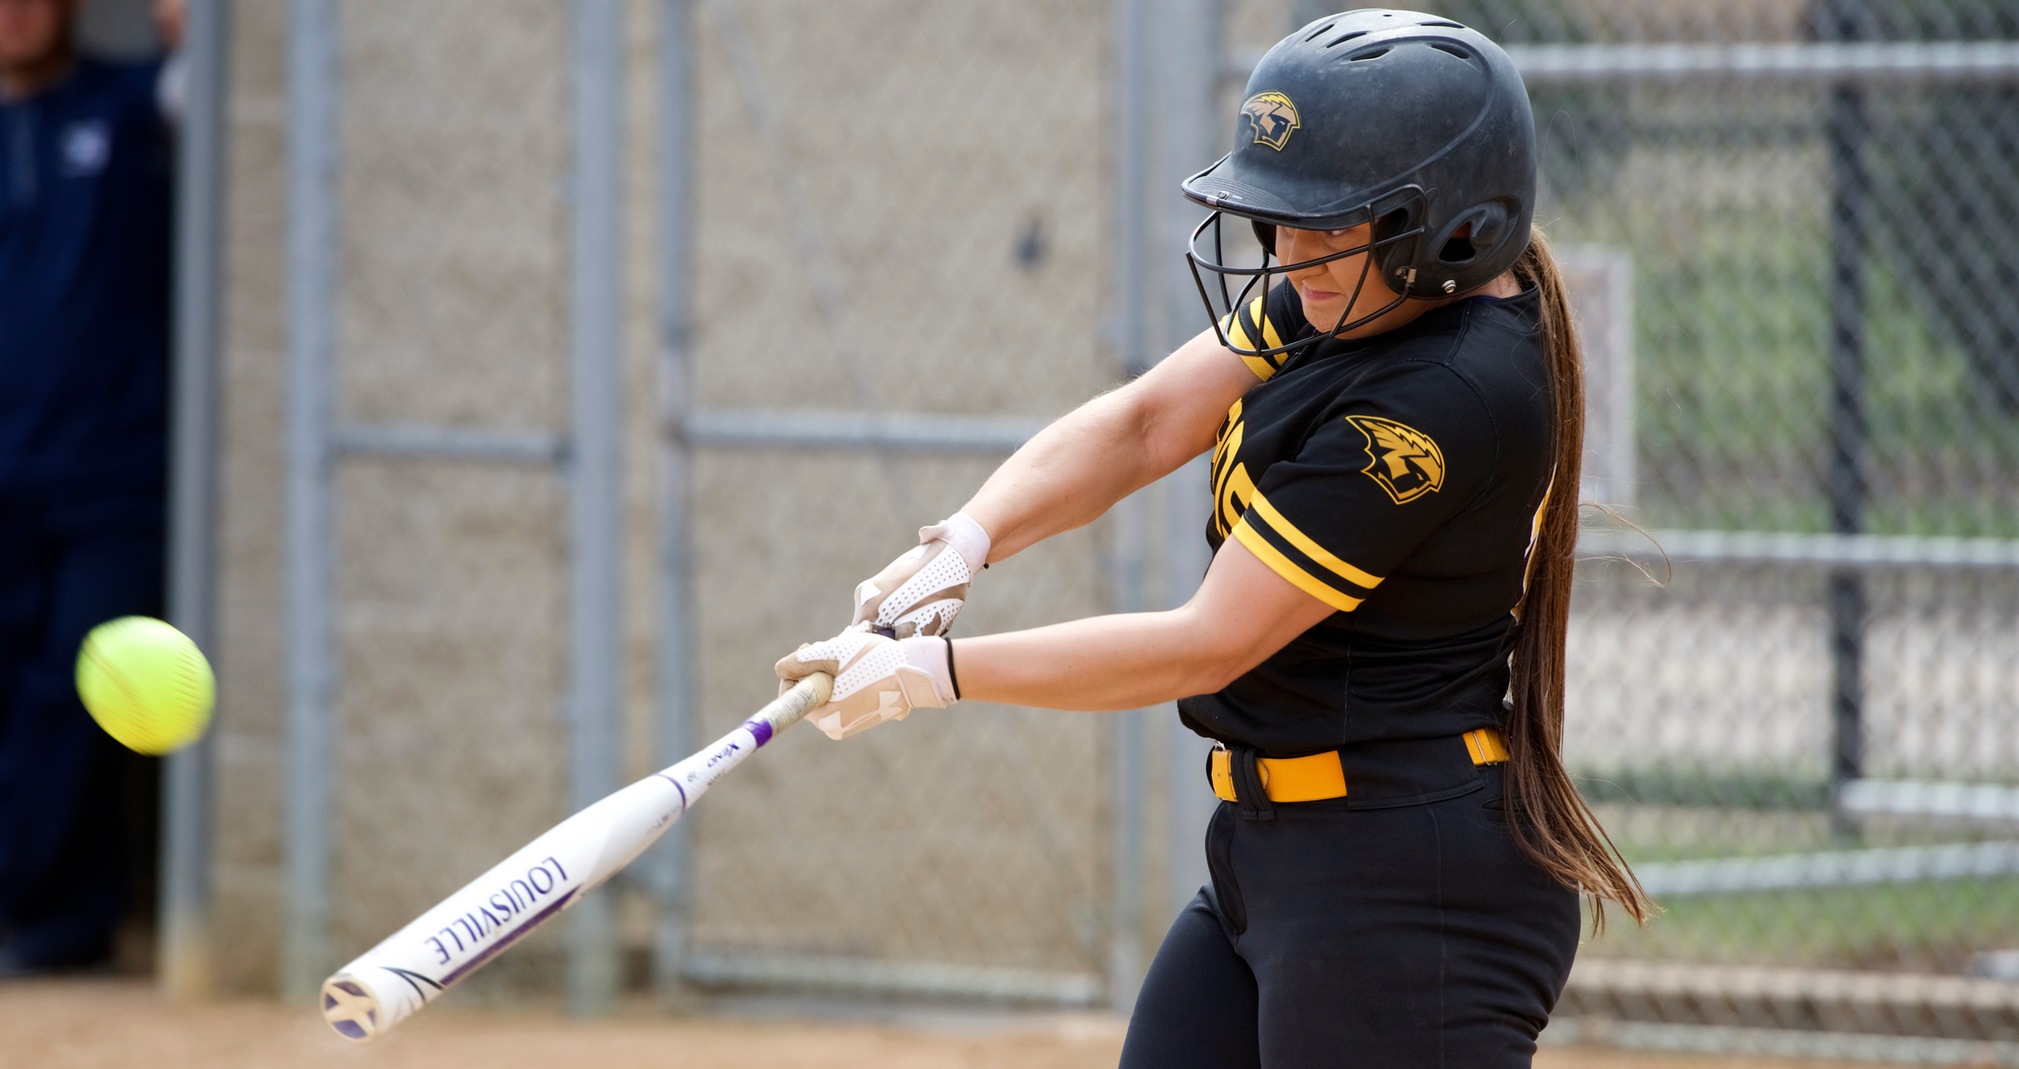 Acacia Tupa homered and doubled among her five hits against the Blue Devils.